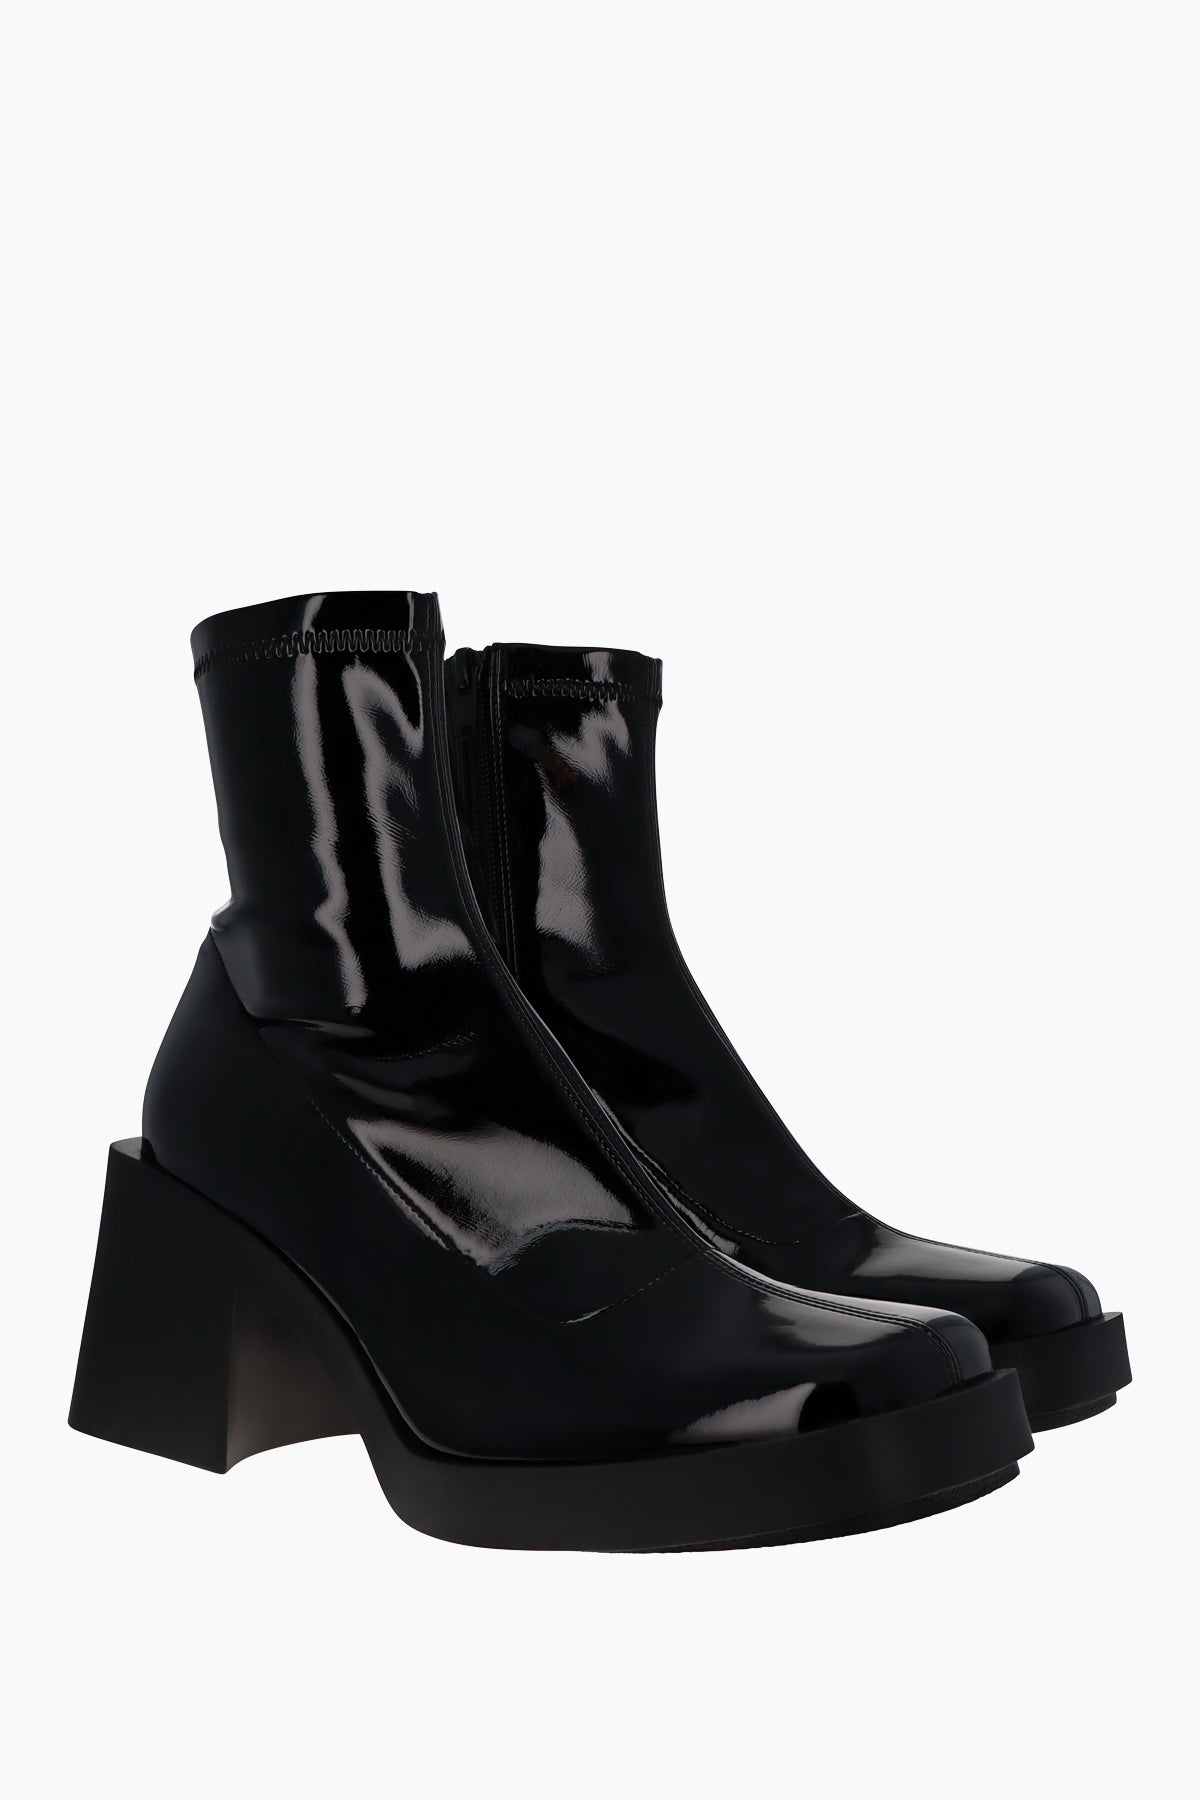 Lucy black patent boots